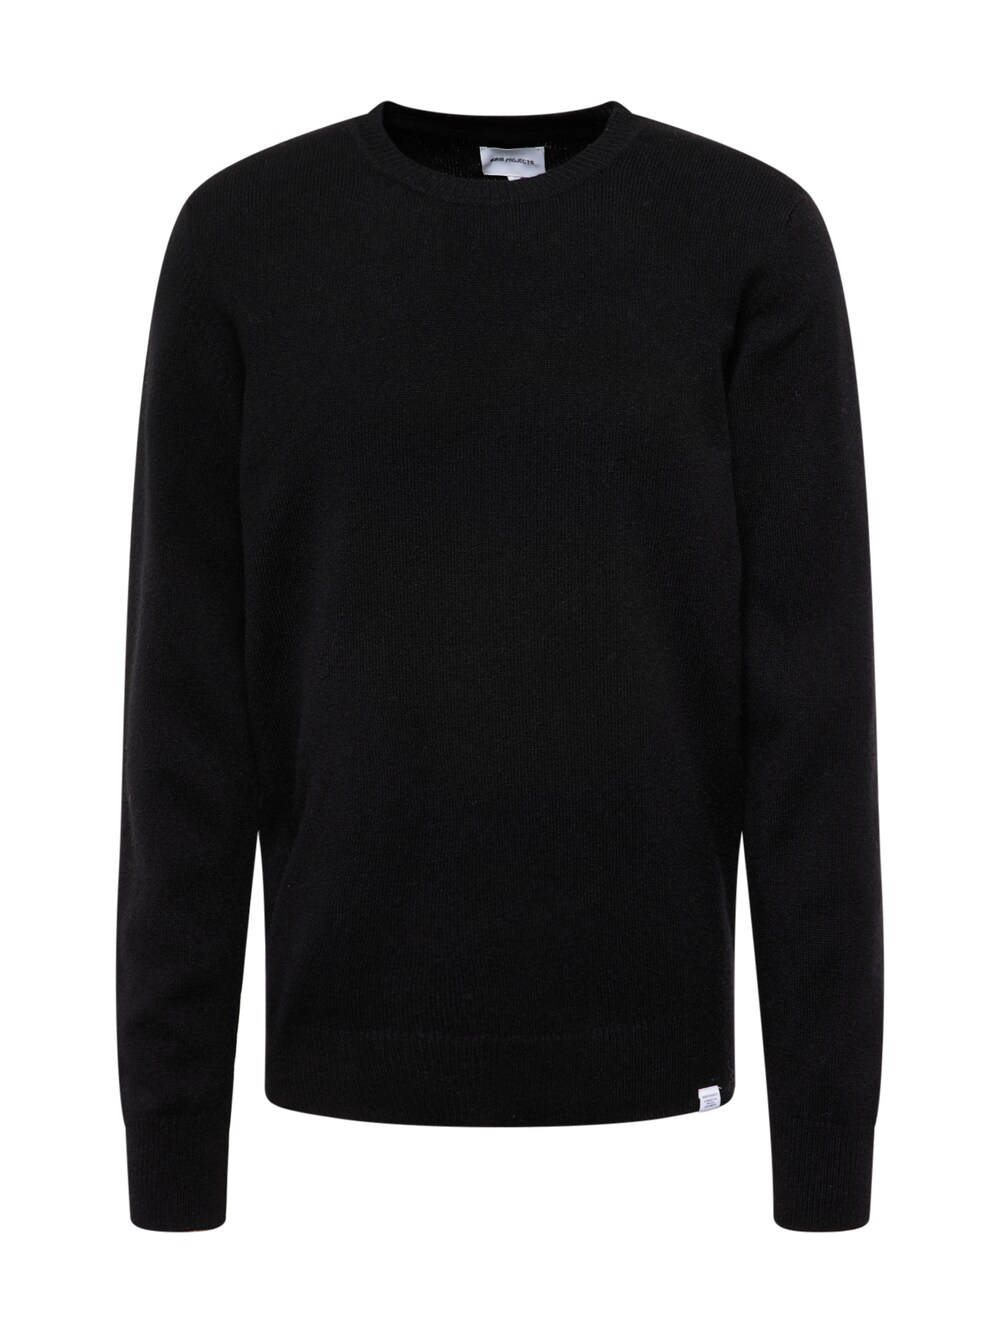 Свитер NORSE PROJECTS Sigfred, черный джемпер norse projects sigfred lambswool knit серый